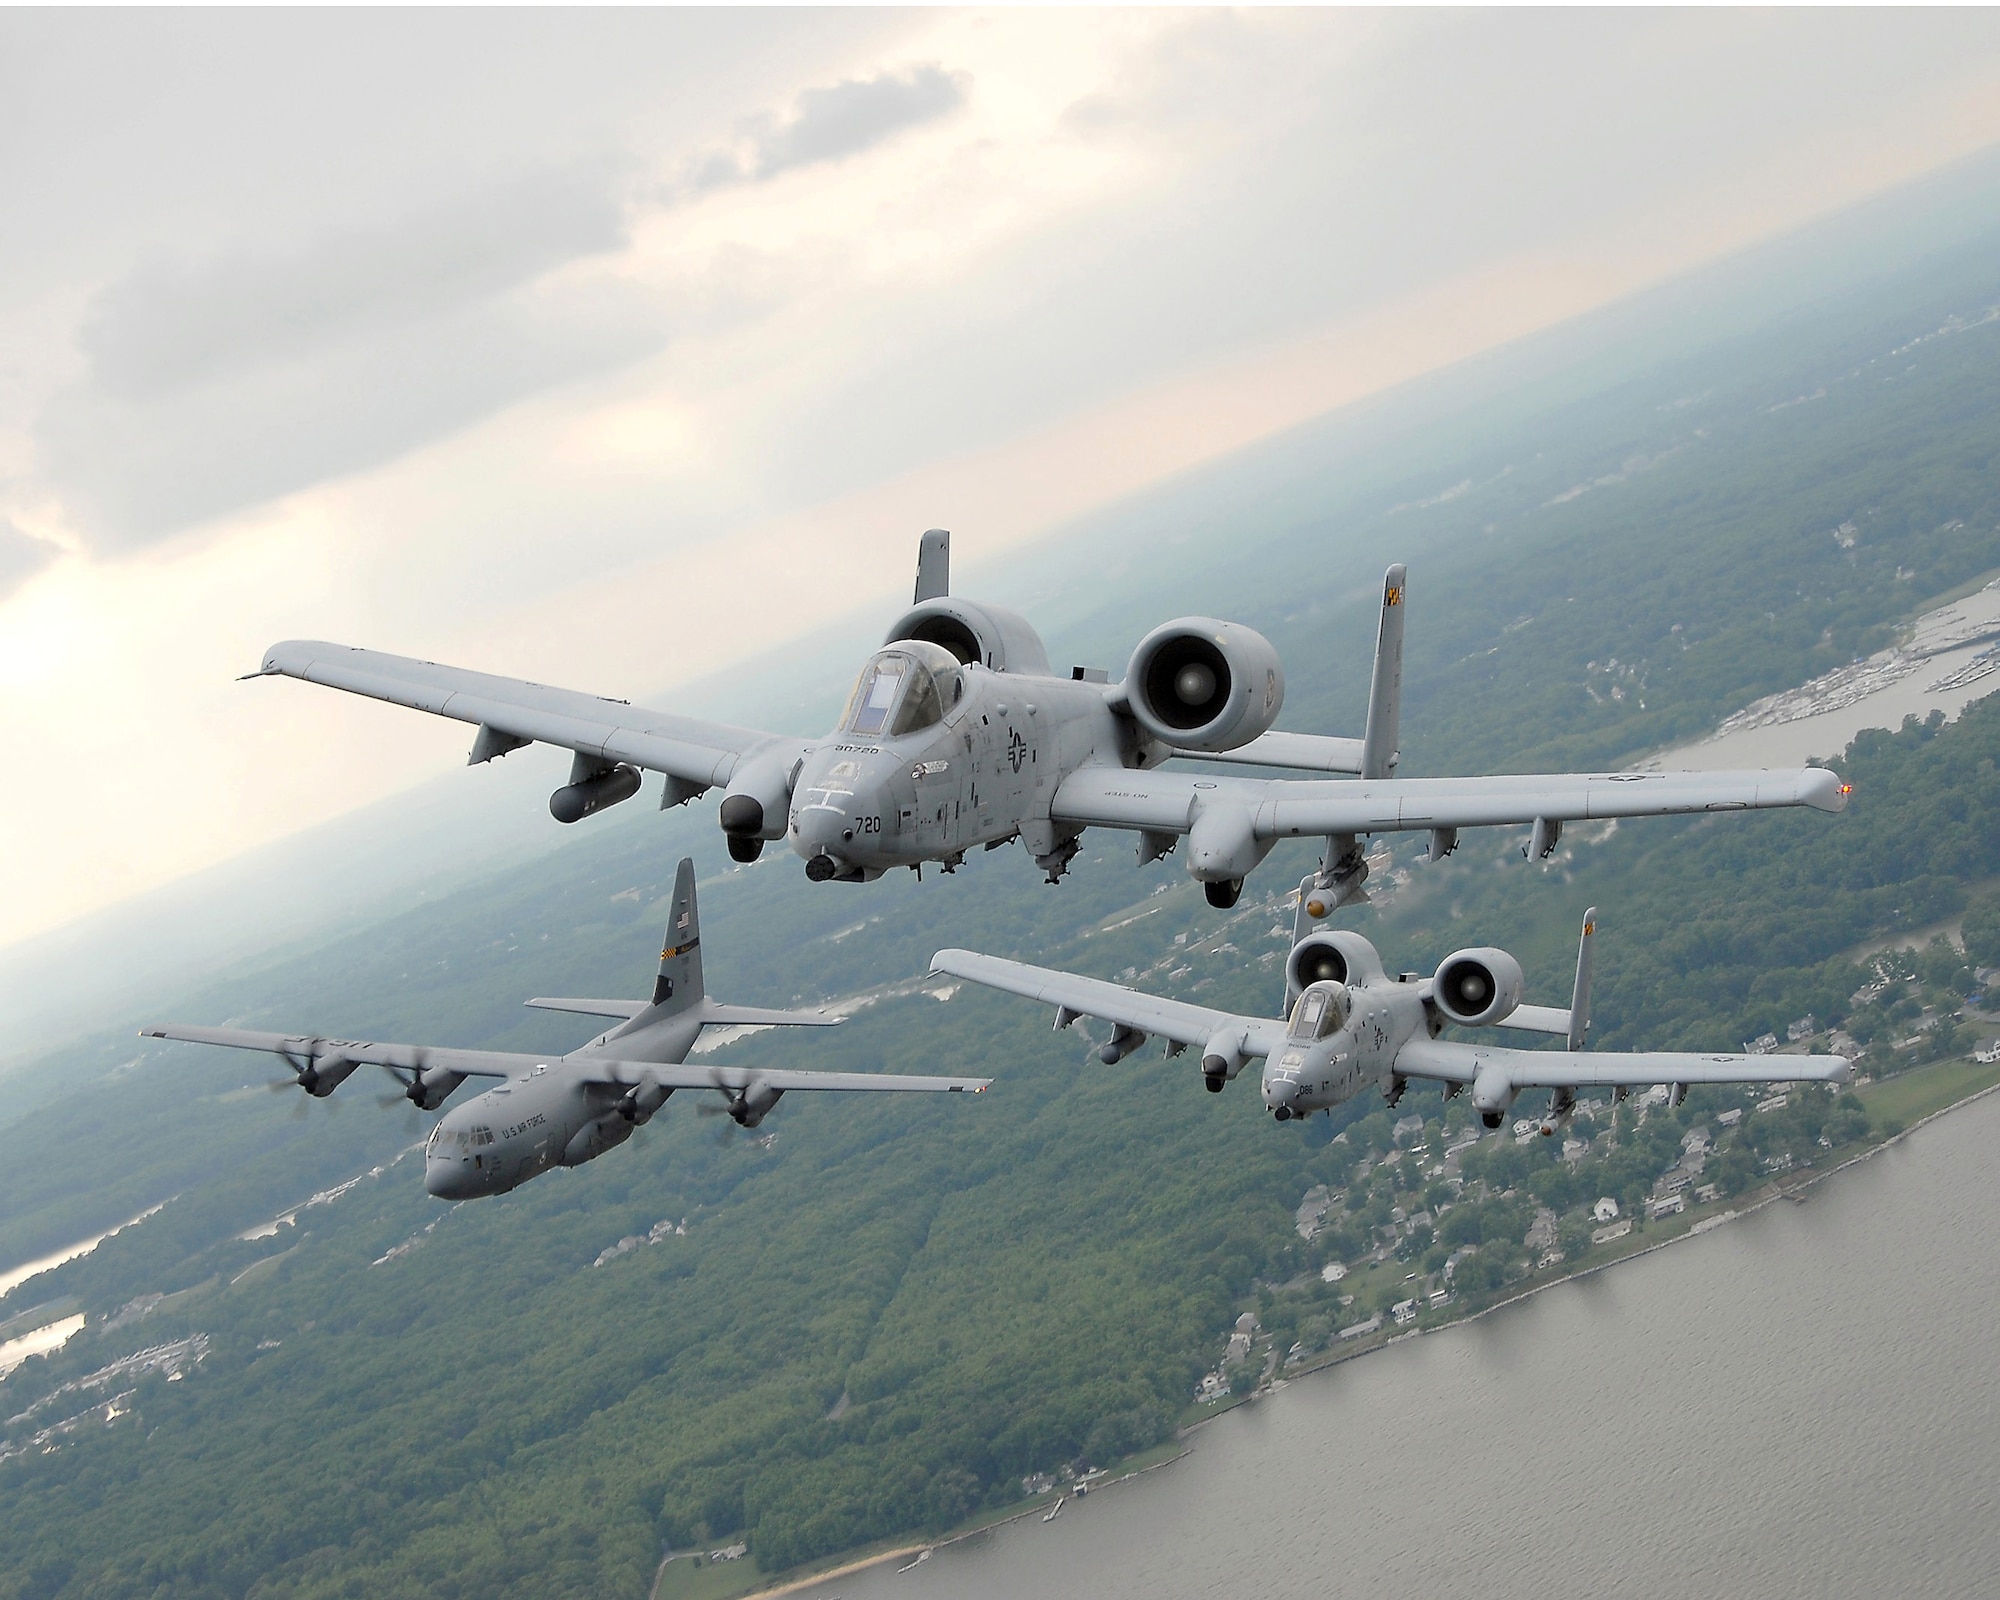 Maryland Air National Guard Celebrates 100 Years Serving the State and Nation